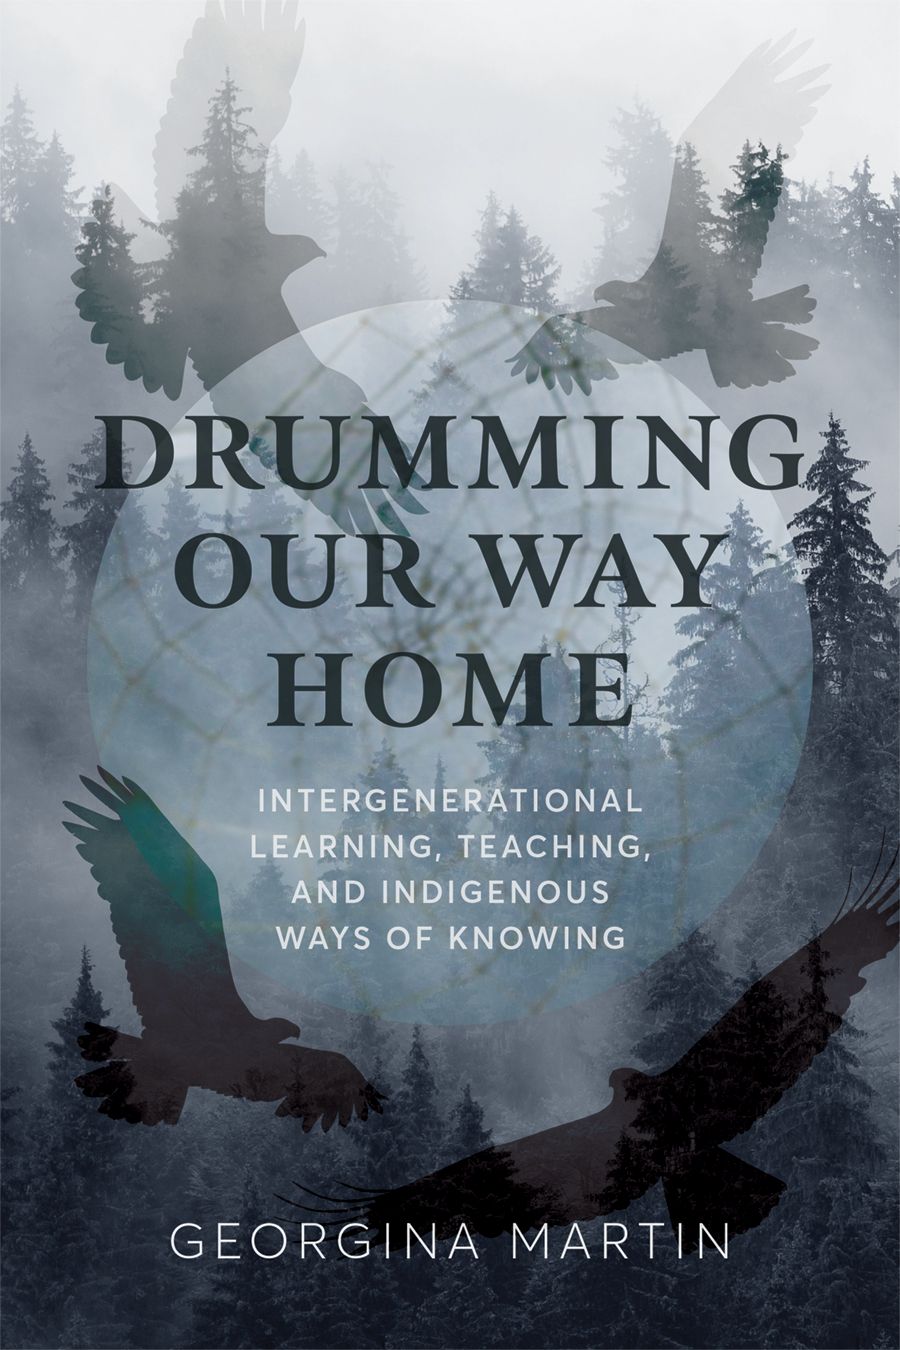 Drumming Our Way Home: Intergenerational Learning, Teaching, and Indigenous Ways of Knowing